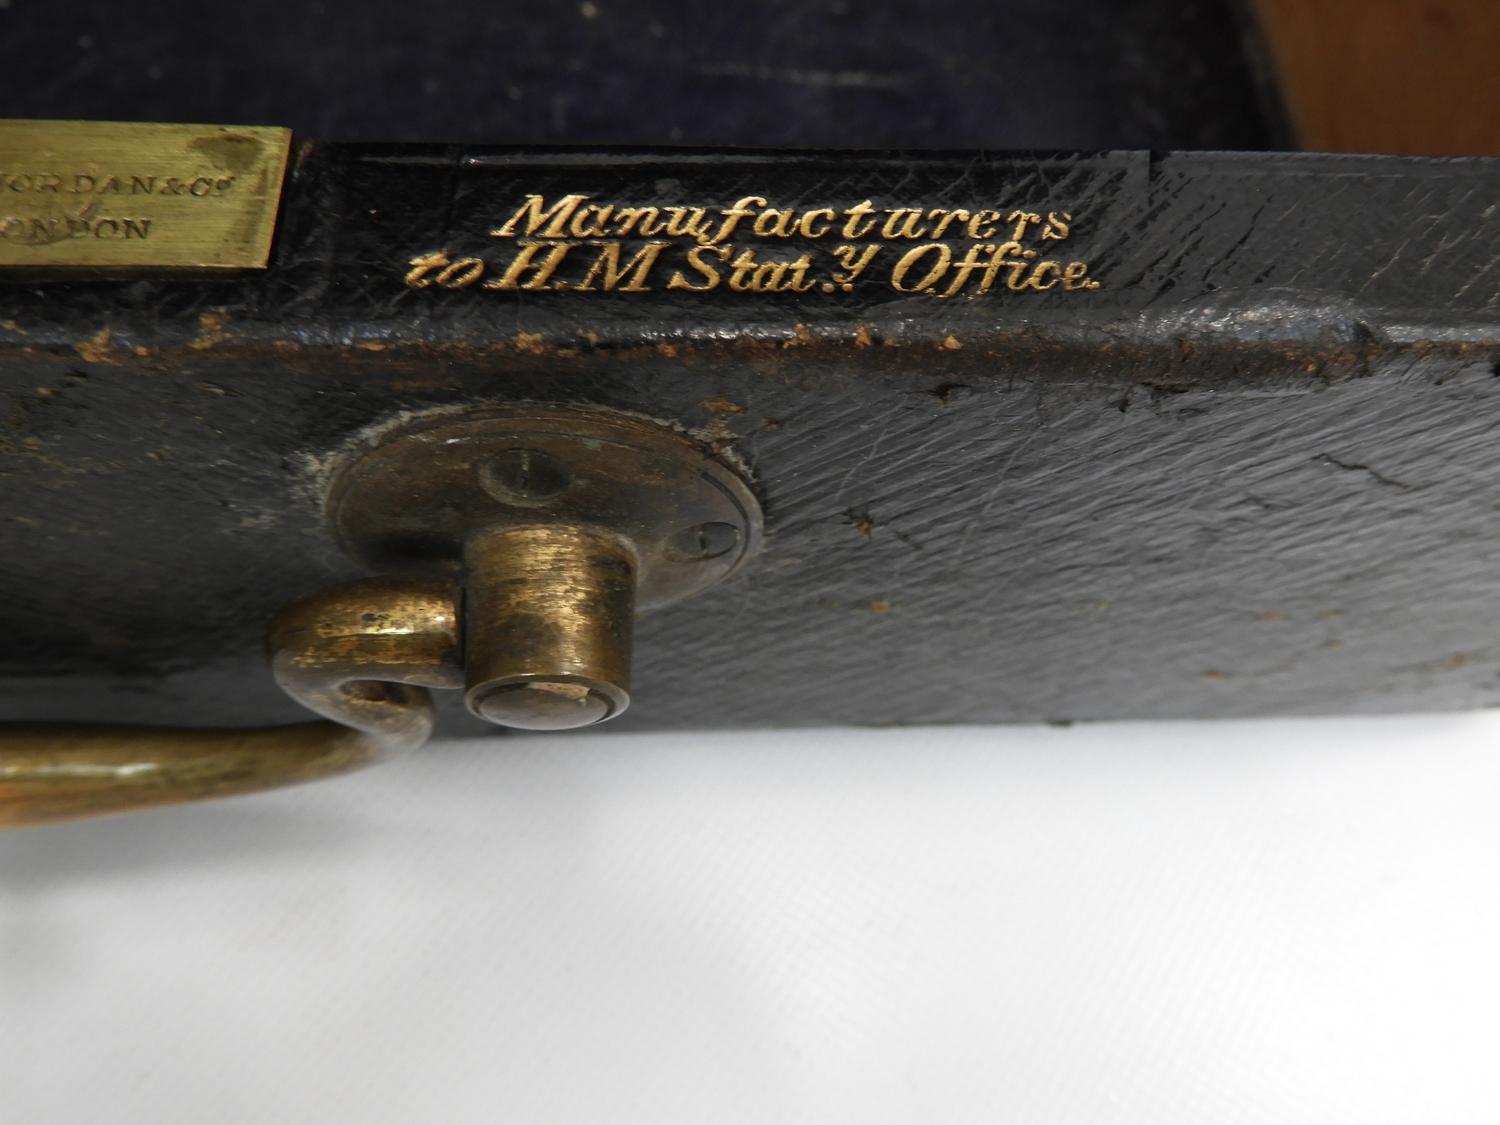 Leather Covered Stationery Box - Wickwar & Co 6 Poland Street, Manufactures to HM Stationery Office - Image 4 of 5